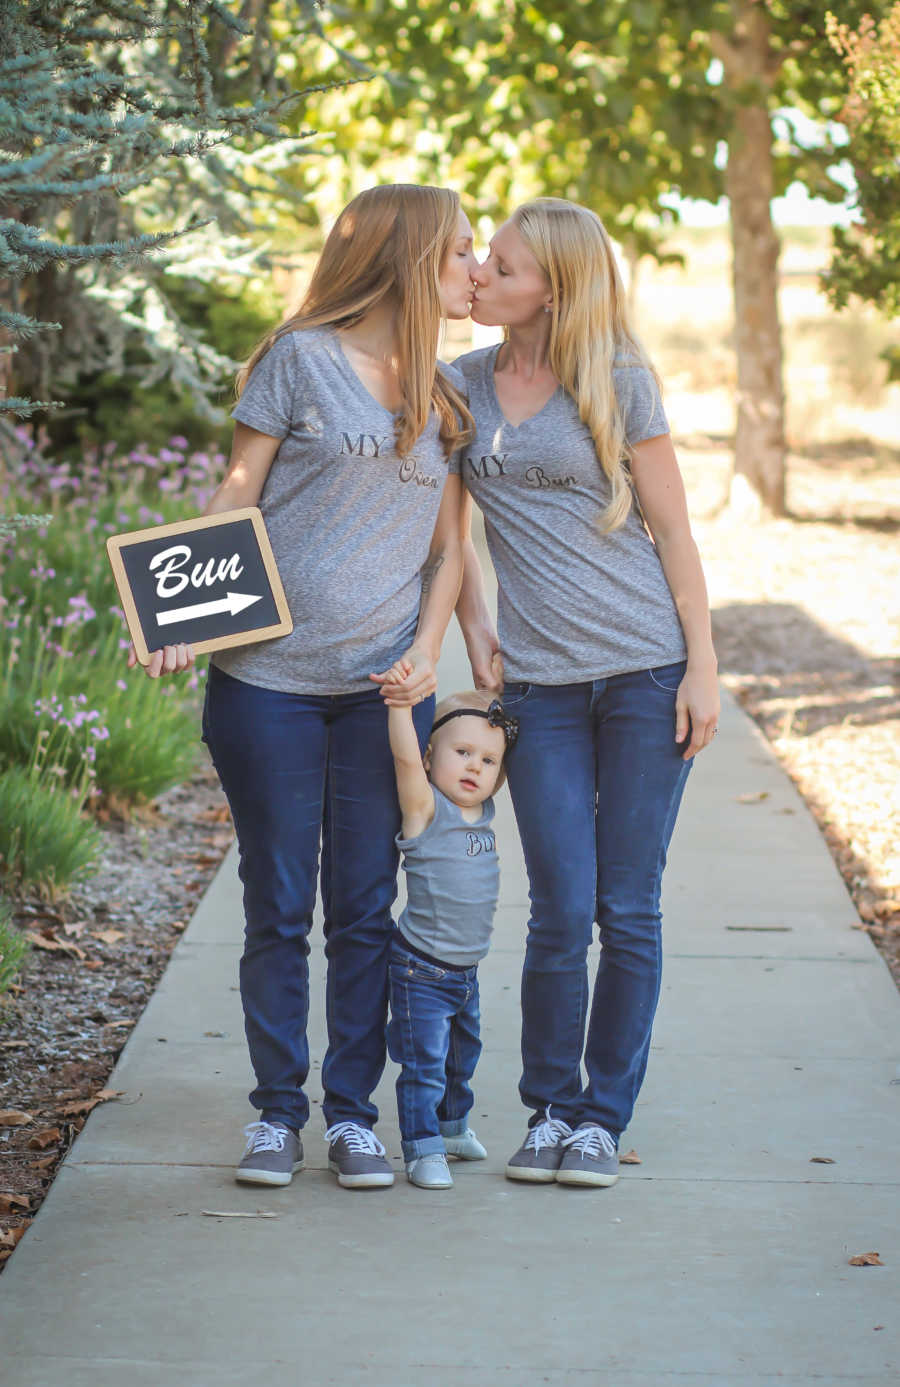 Wives kissing while holding hands with firstborn while pregnant wife through IVF holds sign saying "bun" pointing to stomach